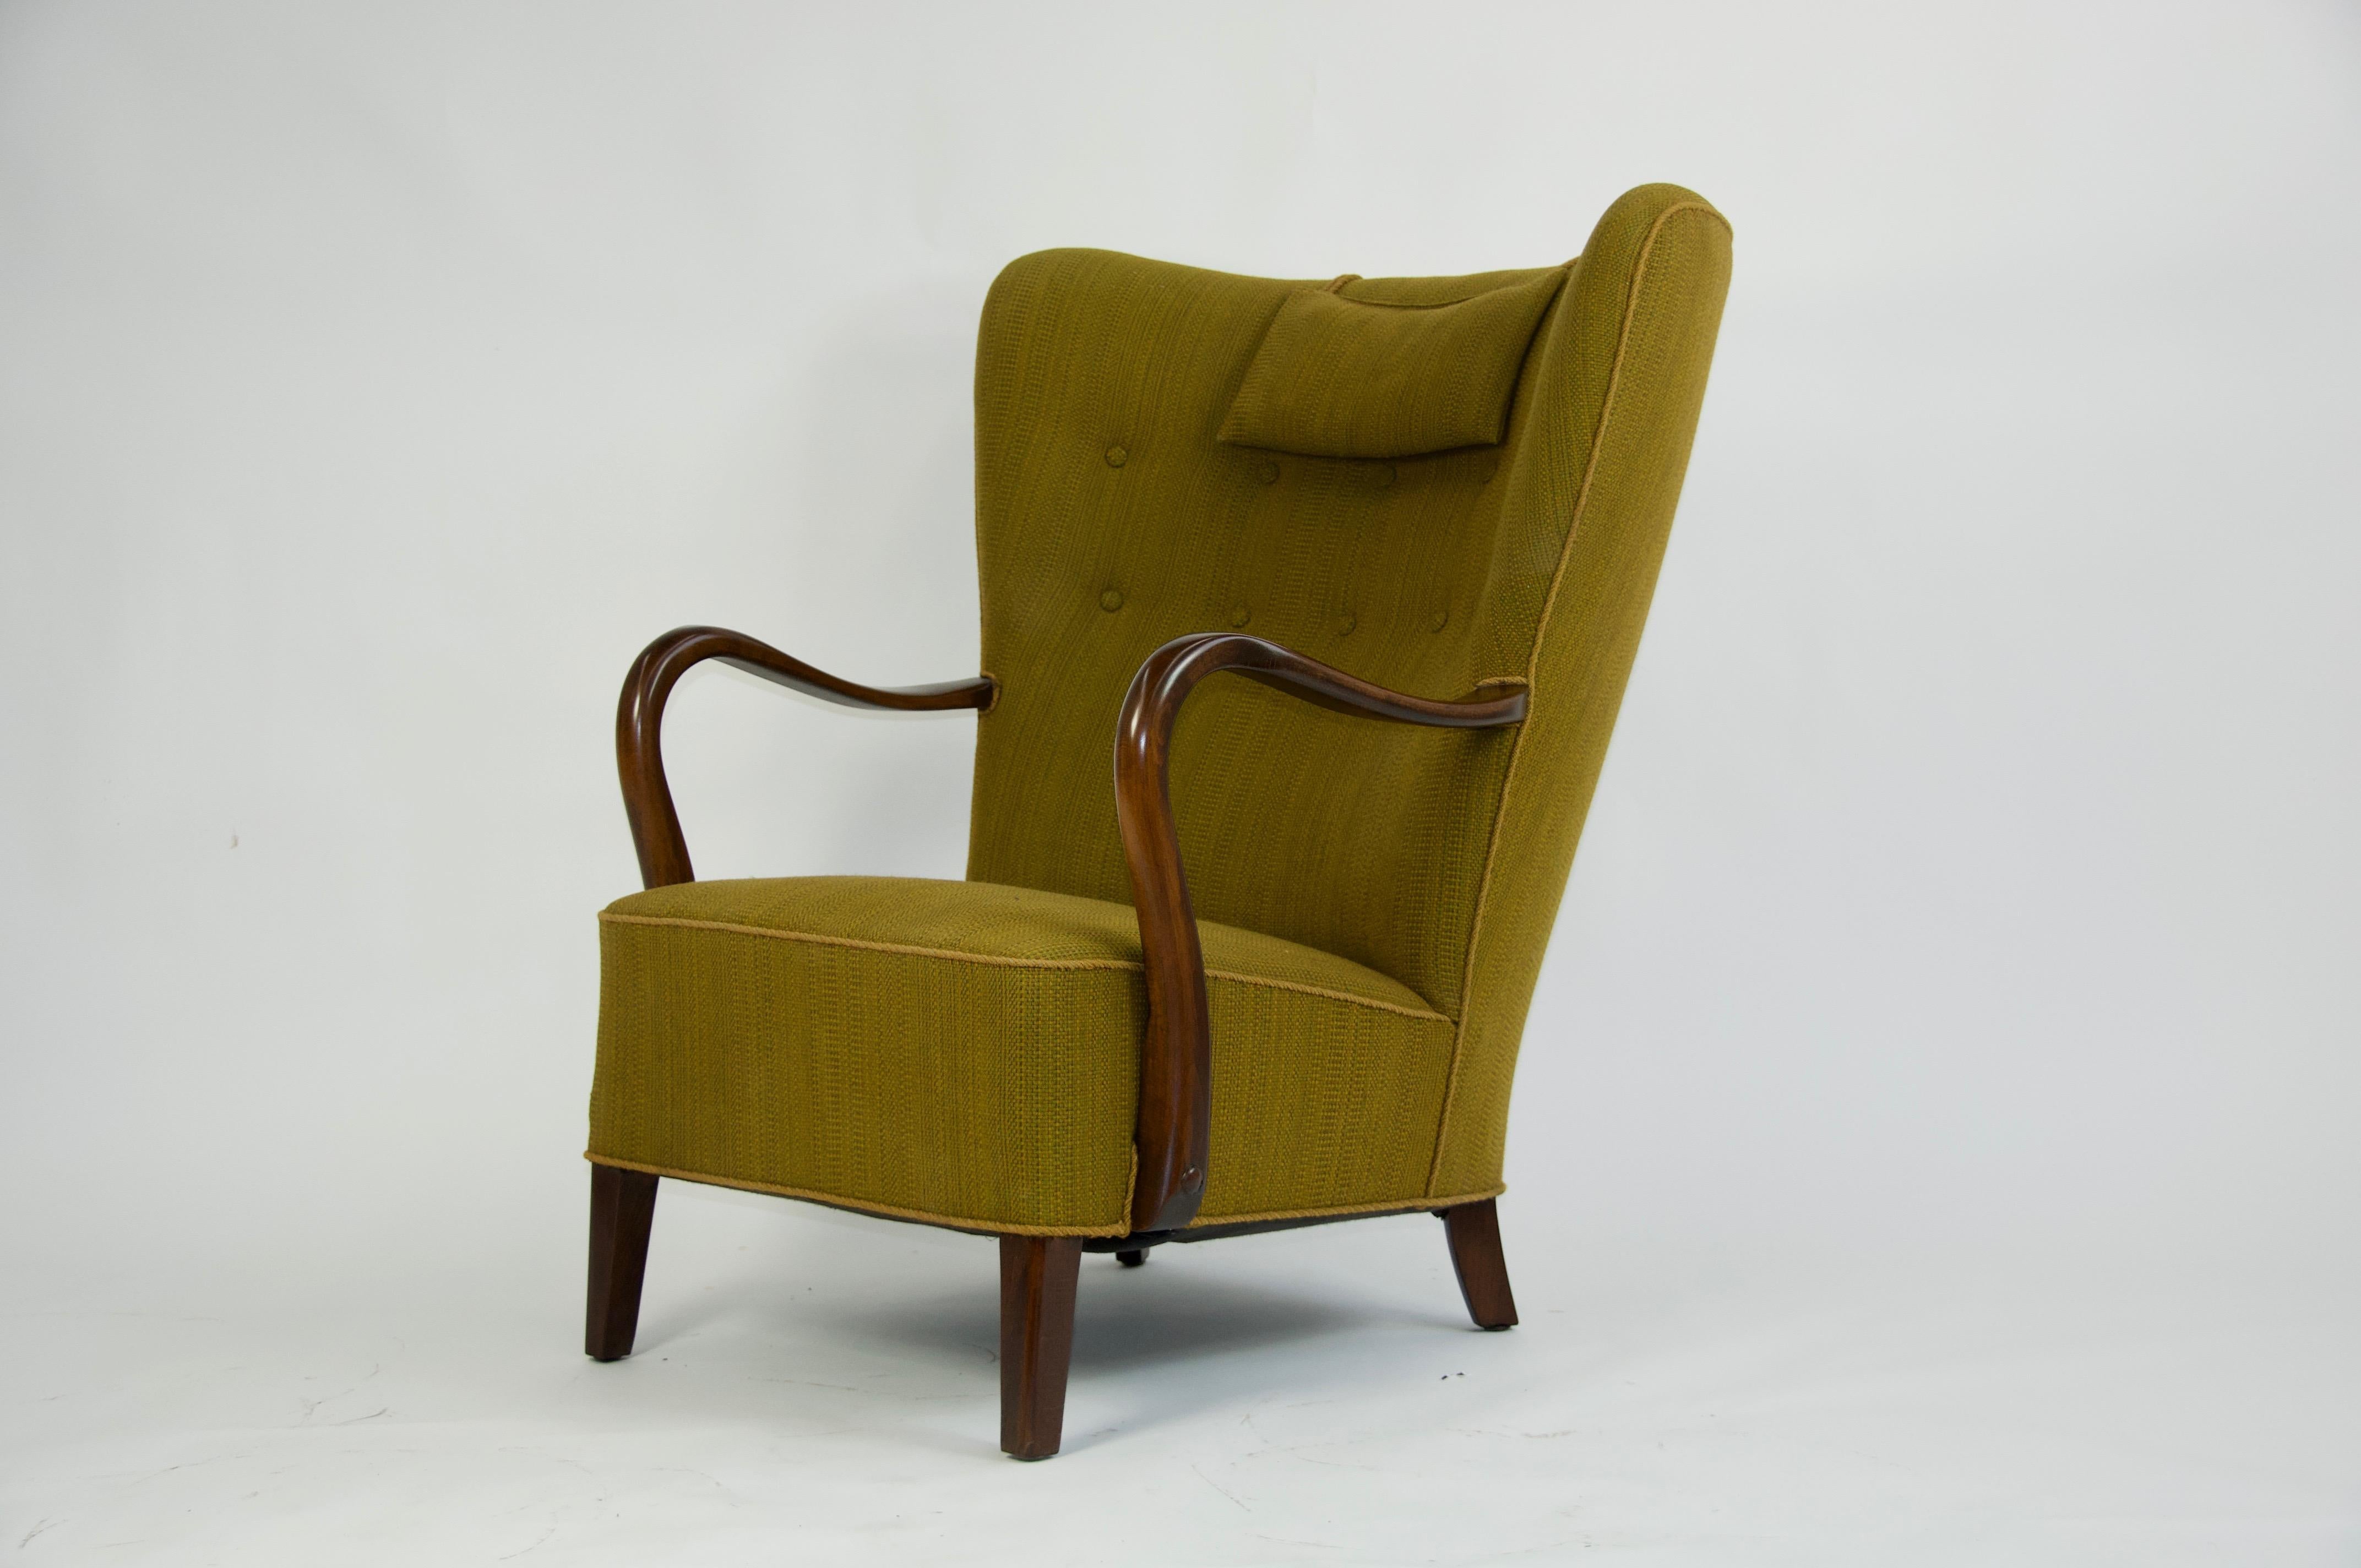 1940s Danish lounge chair by Alfred Christensen. Sculpted Beech wood frame refinished. Original Upholstery



 
Alfred Christensen.